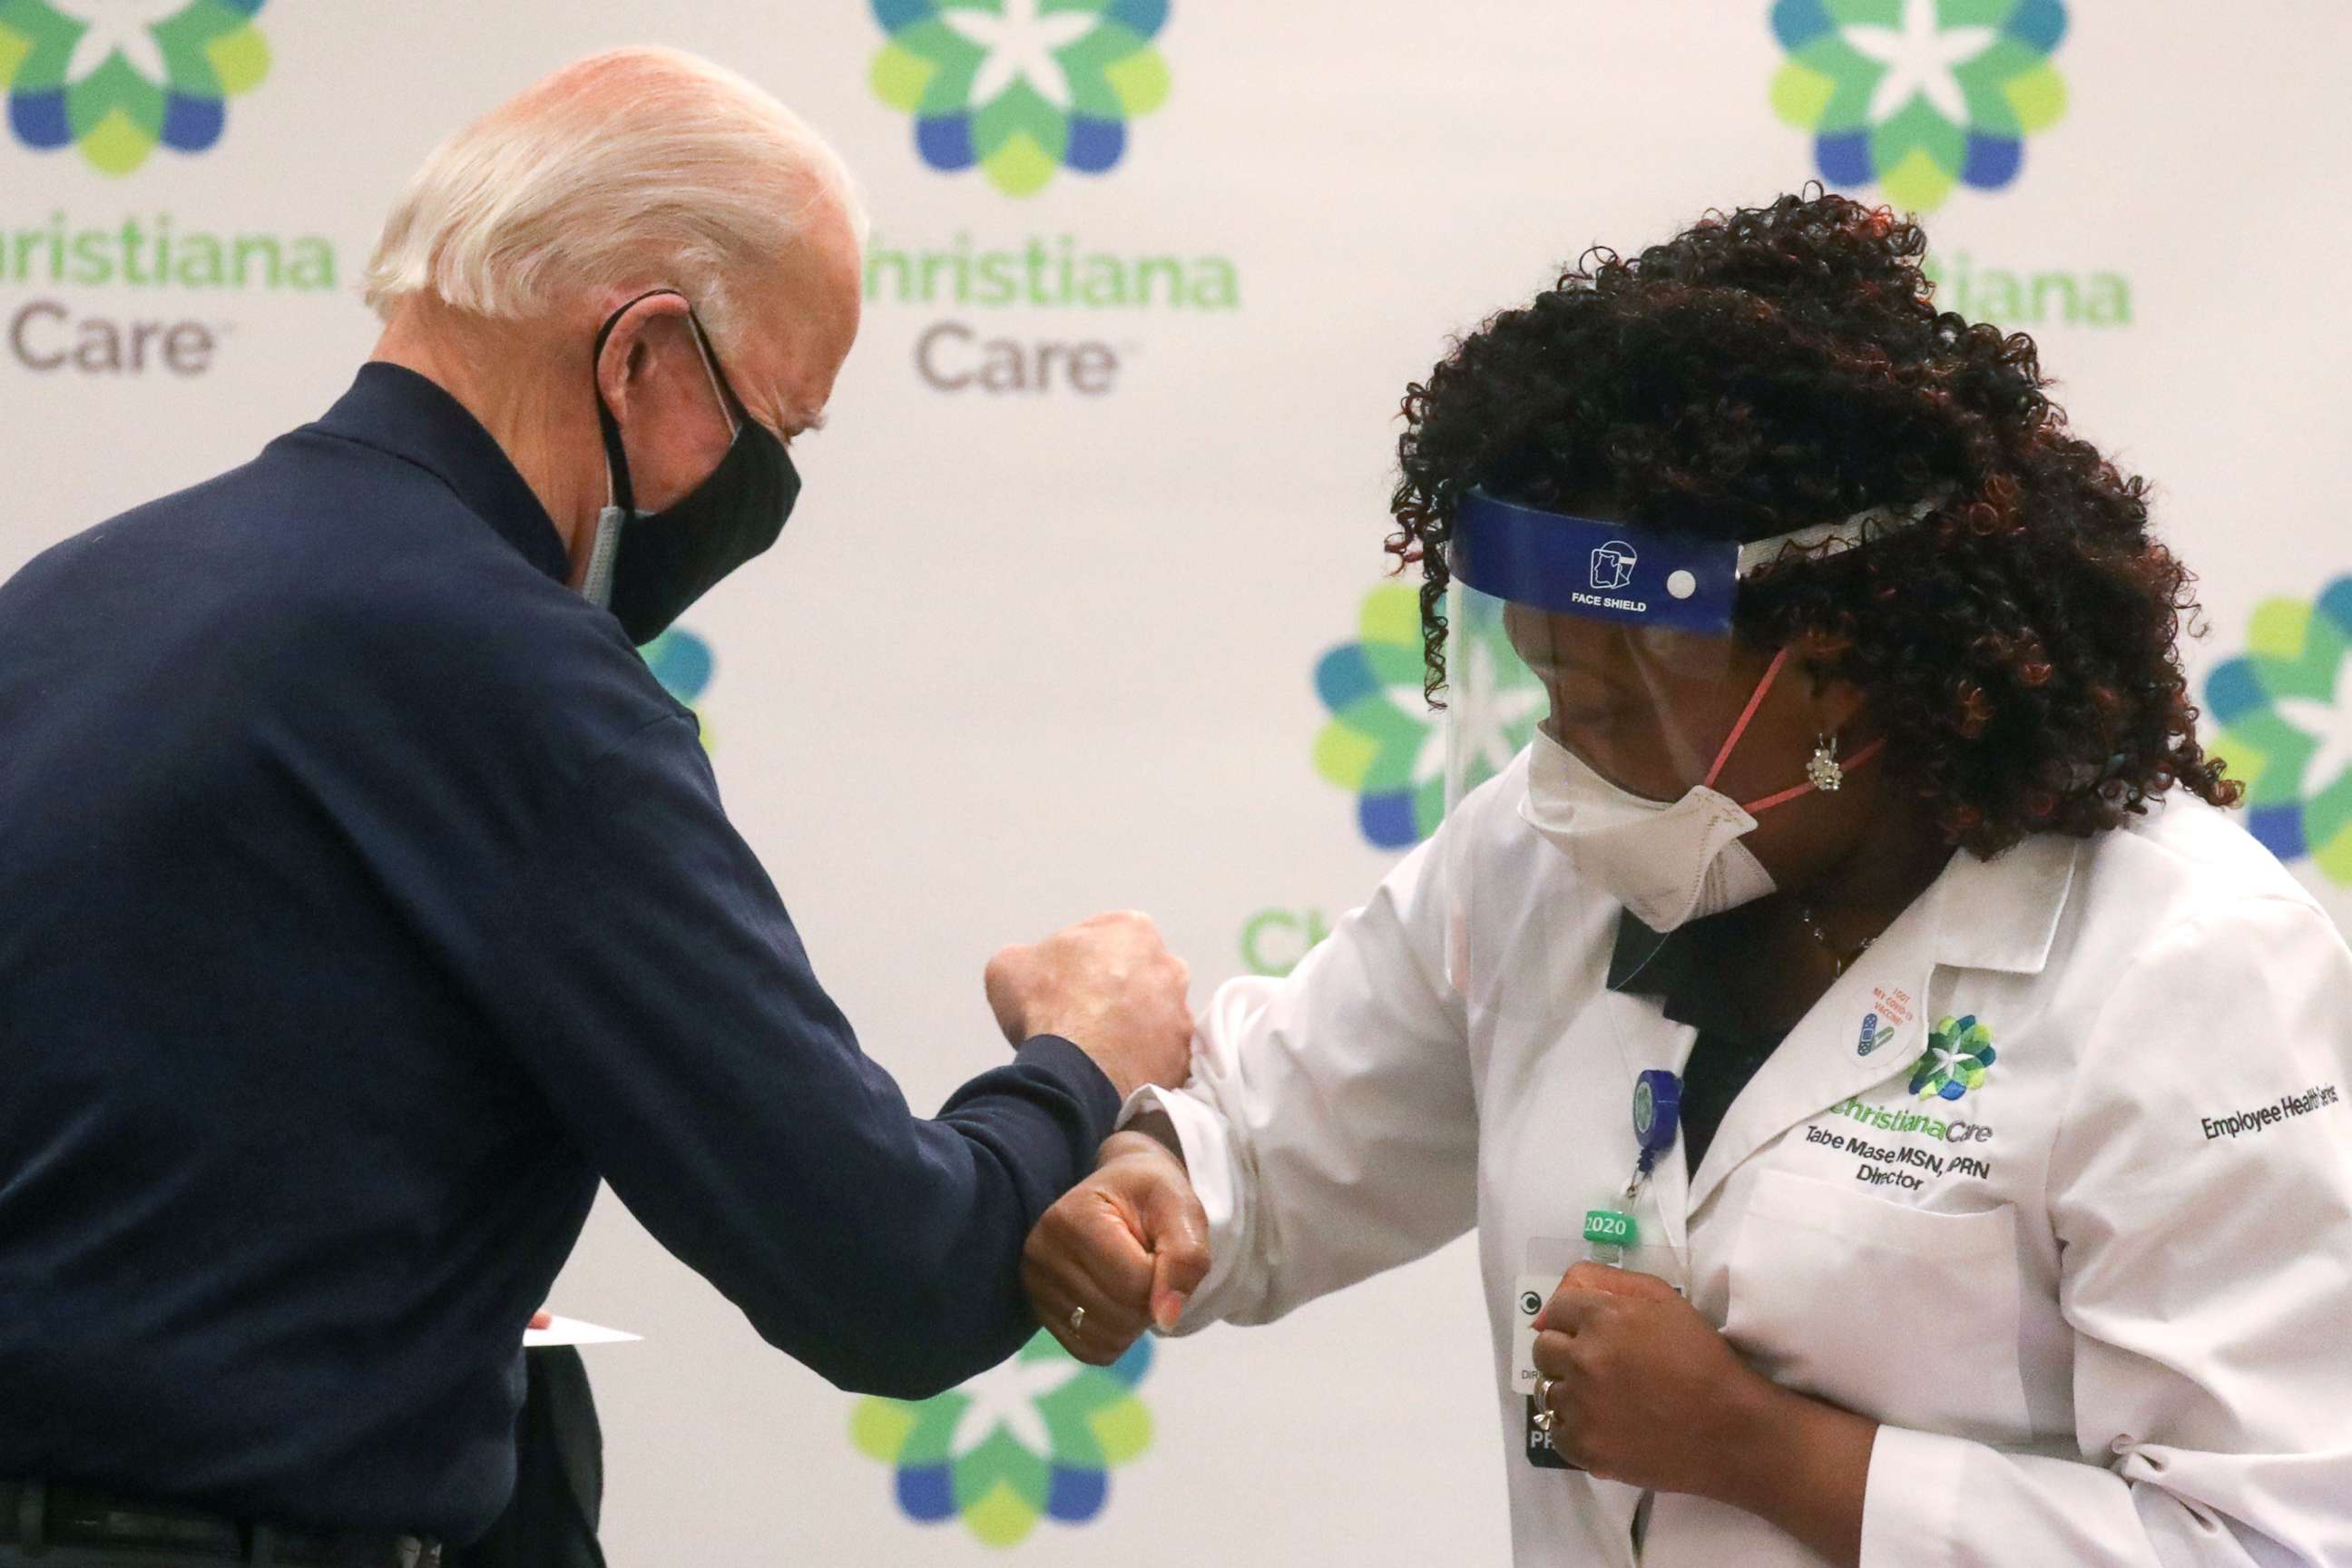 PHOTO: President-elect Joe Biden elbow bumps nurse practitioner Tabe Mase after receiving a dose of a vaccine against the coronavirus disease (COVID-19) at ChristianaCare Christiana Hospital, in Newark, Del., Dec. 21, 2020.